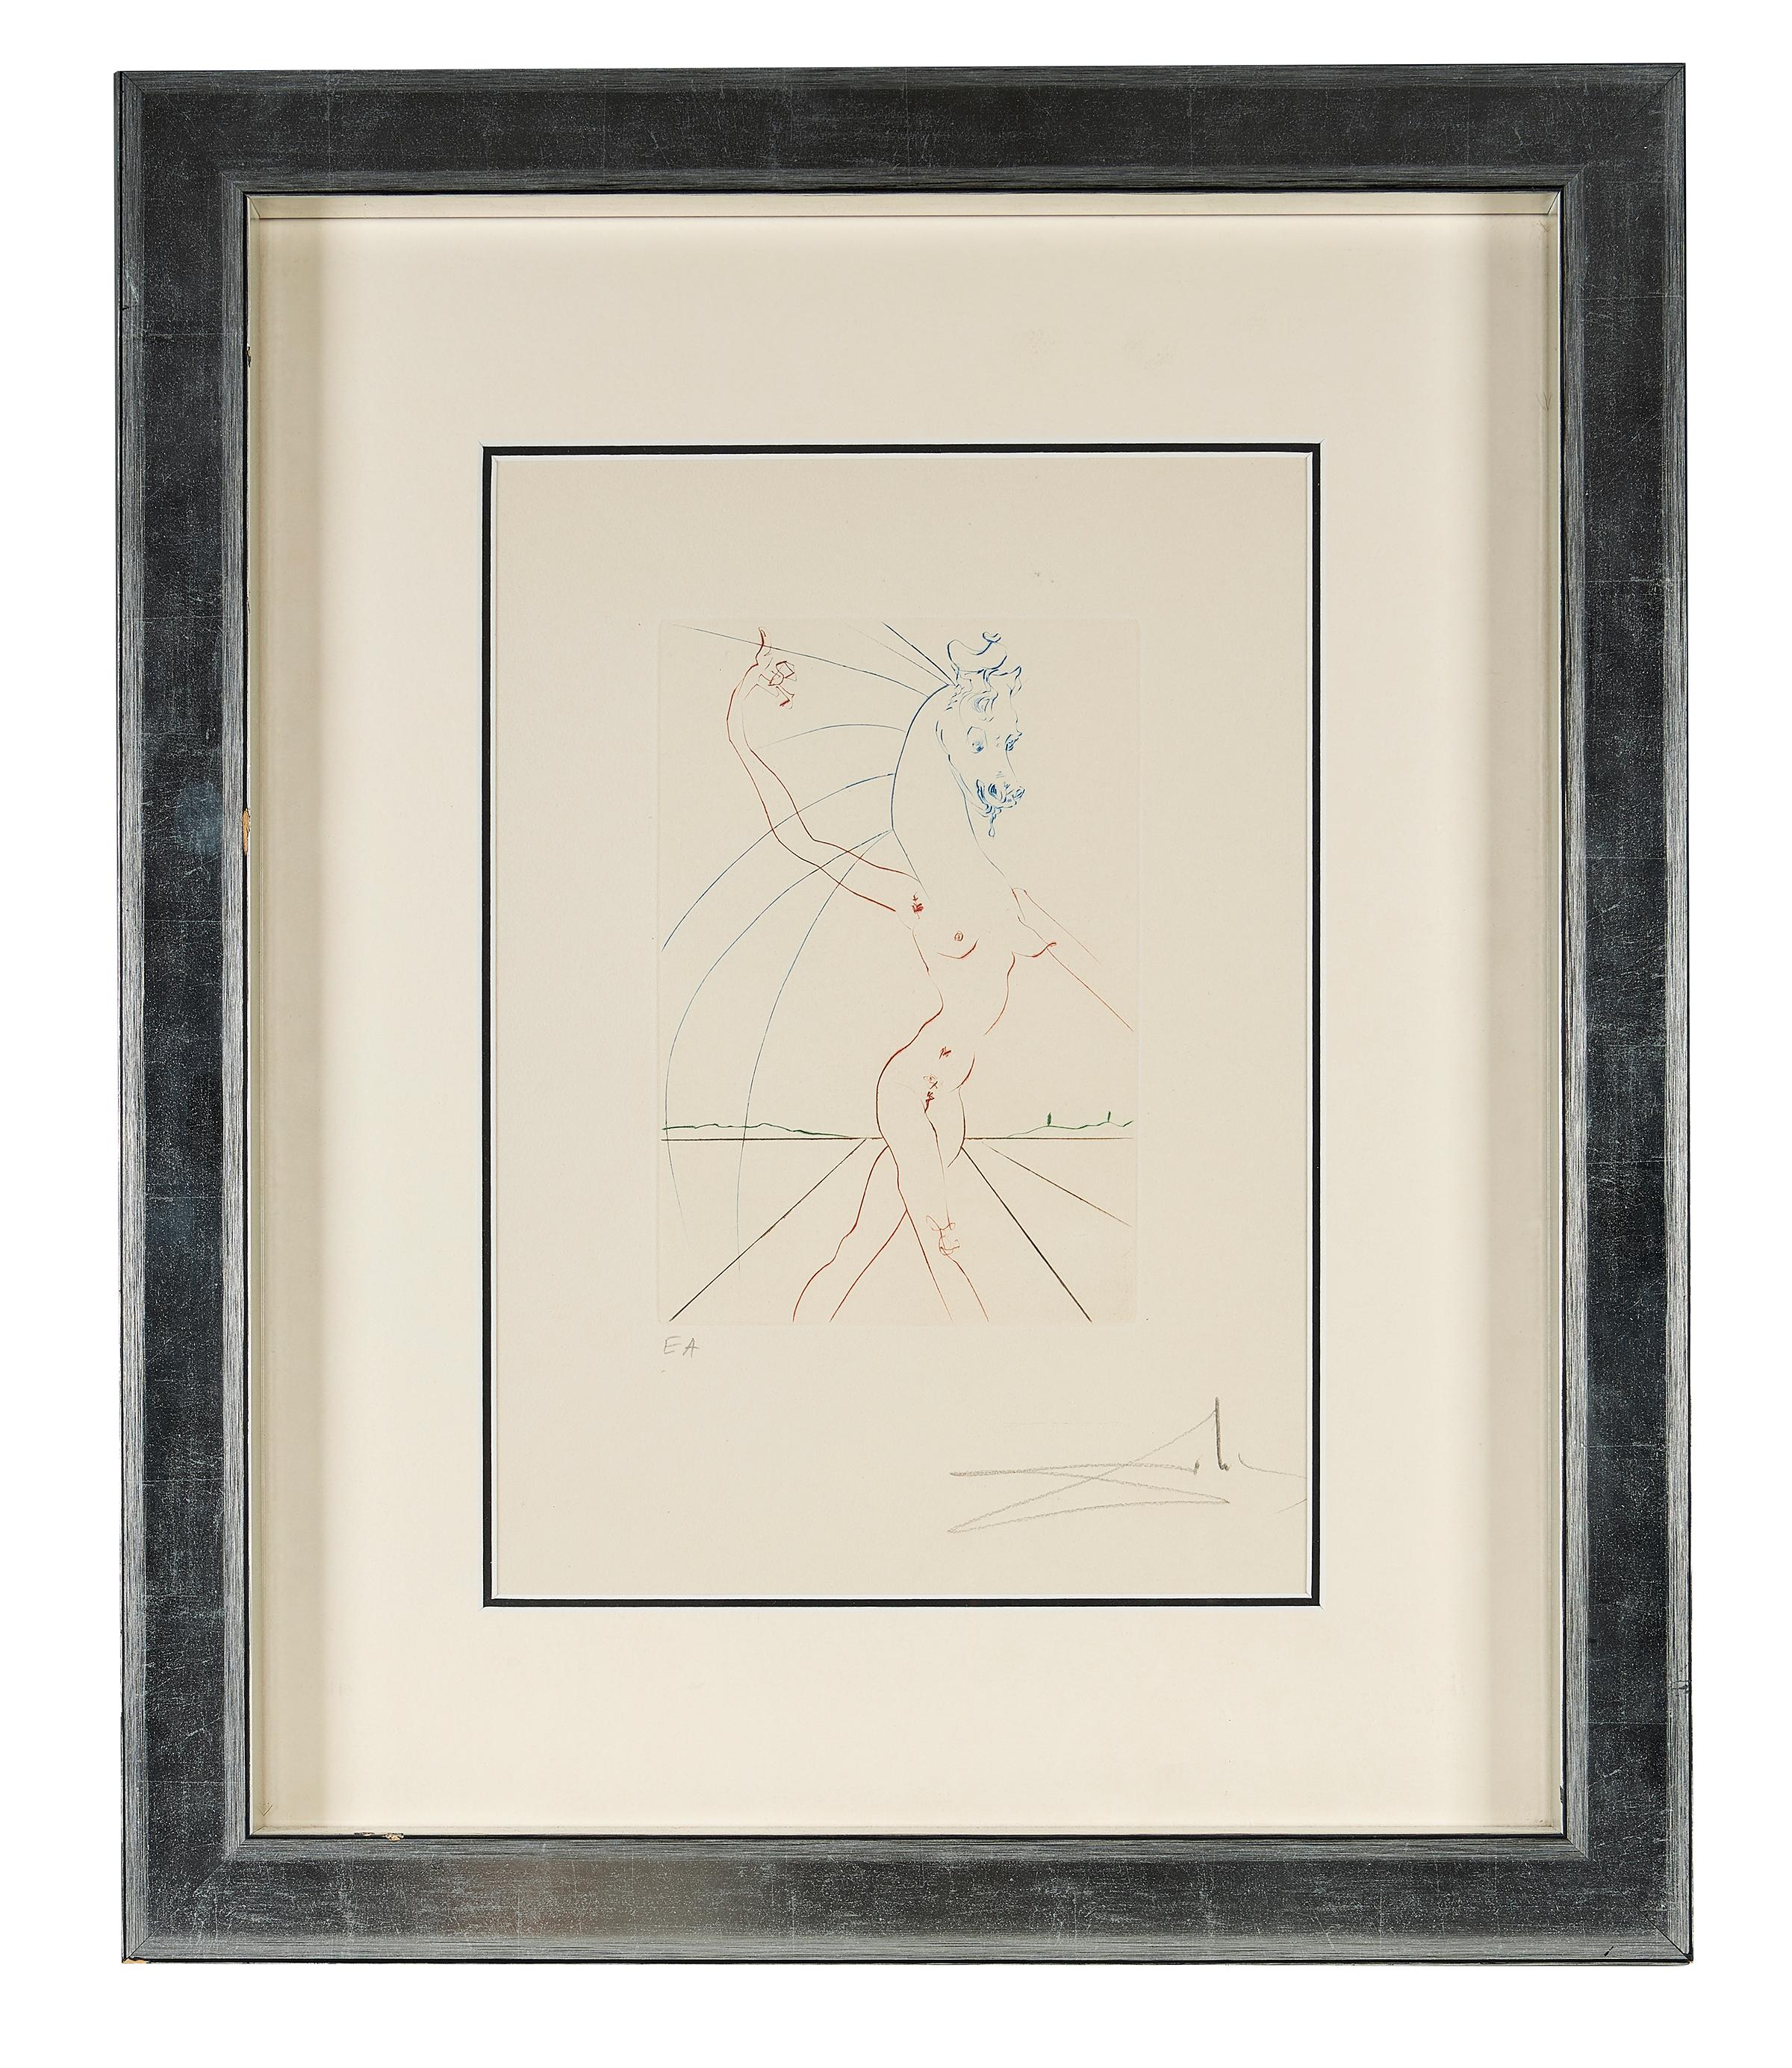 Salvador Dali (Spanish, 1908-1989), 'Hippofemme', 1973, dry point etching, signed, artist's proof (edition of 175), framed, published Micheler and Lopsinge, Catalogue Raisonne.